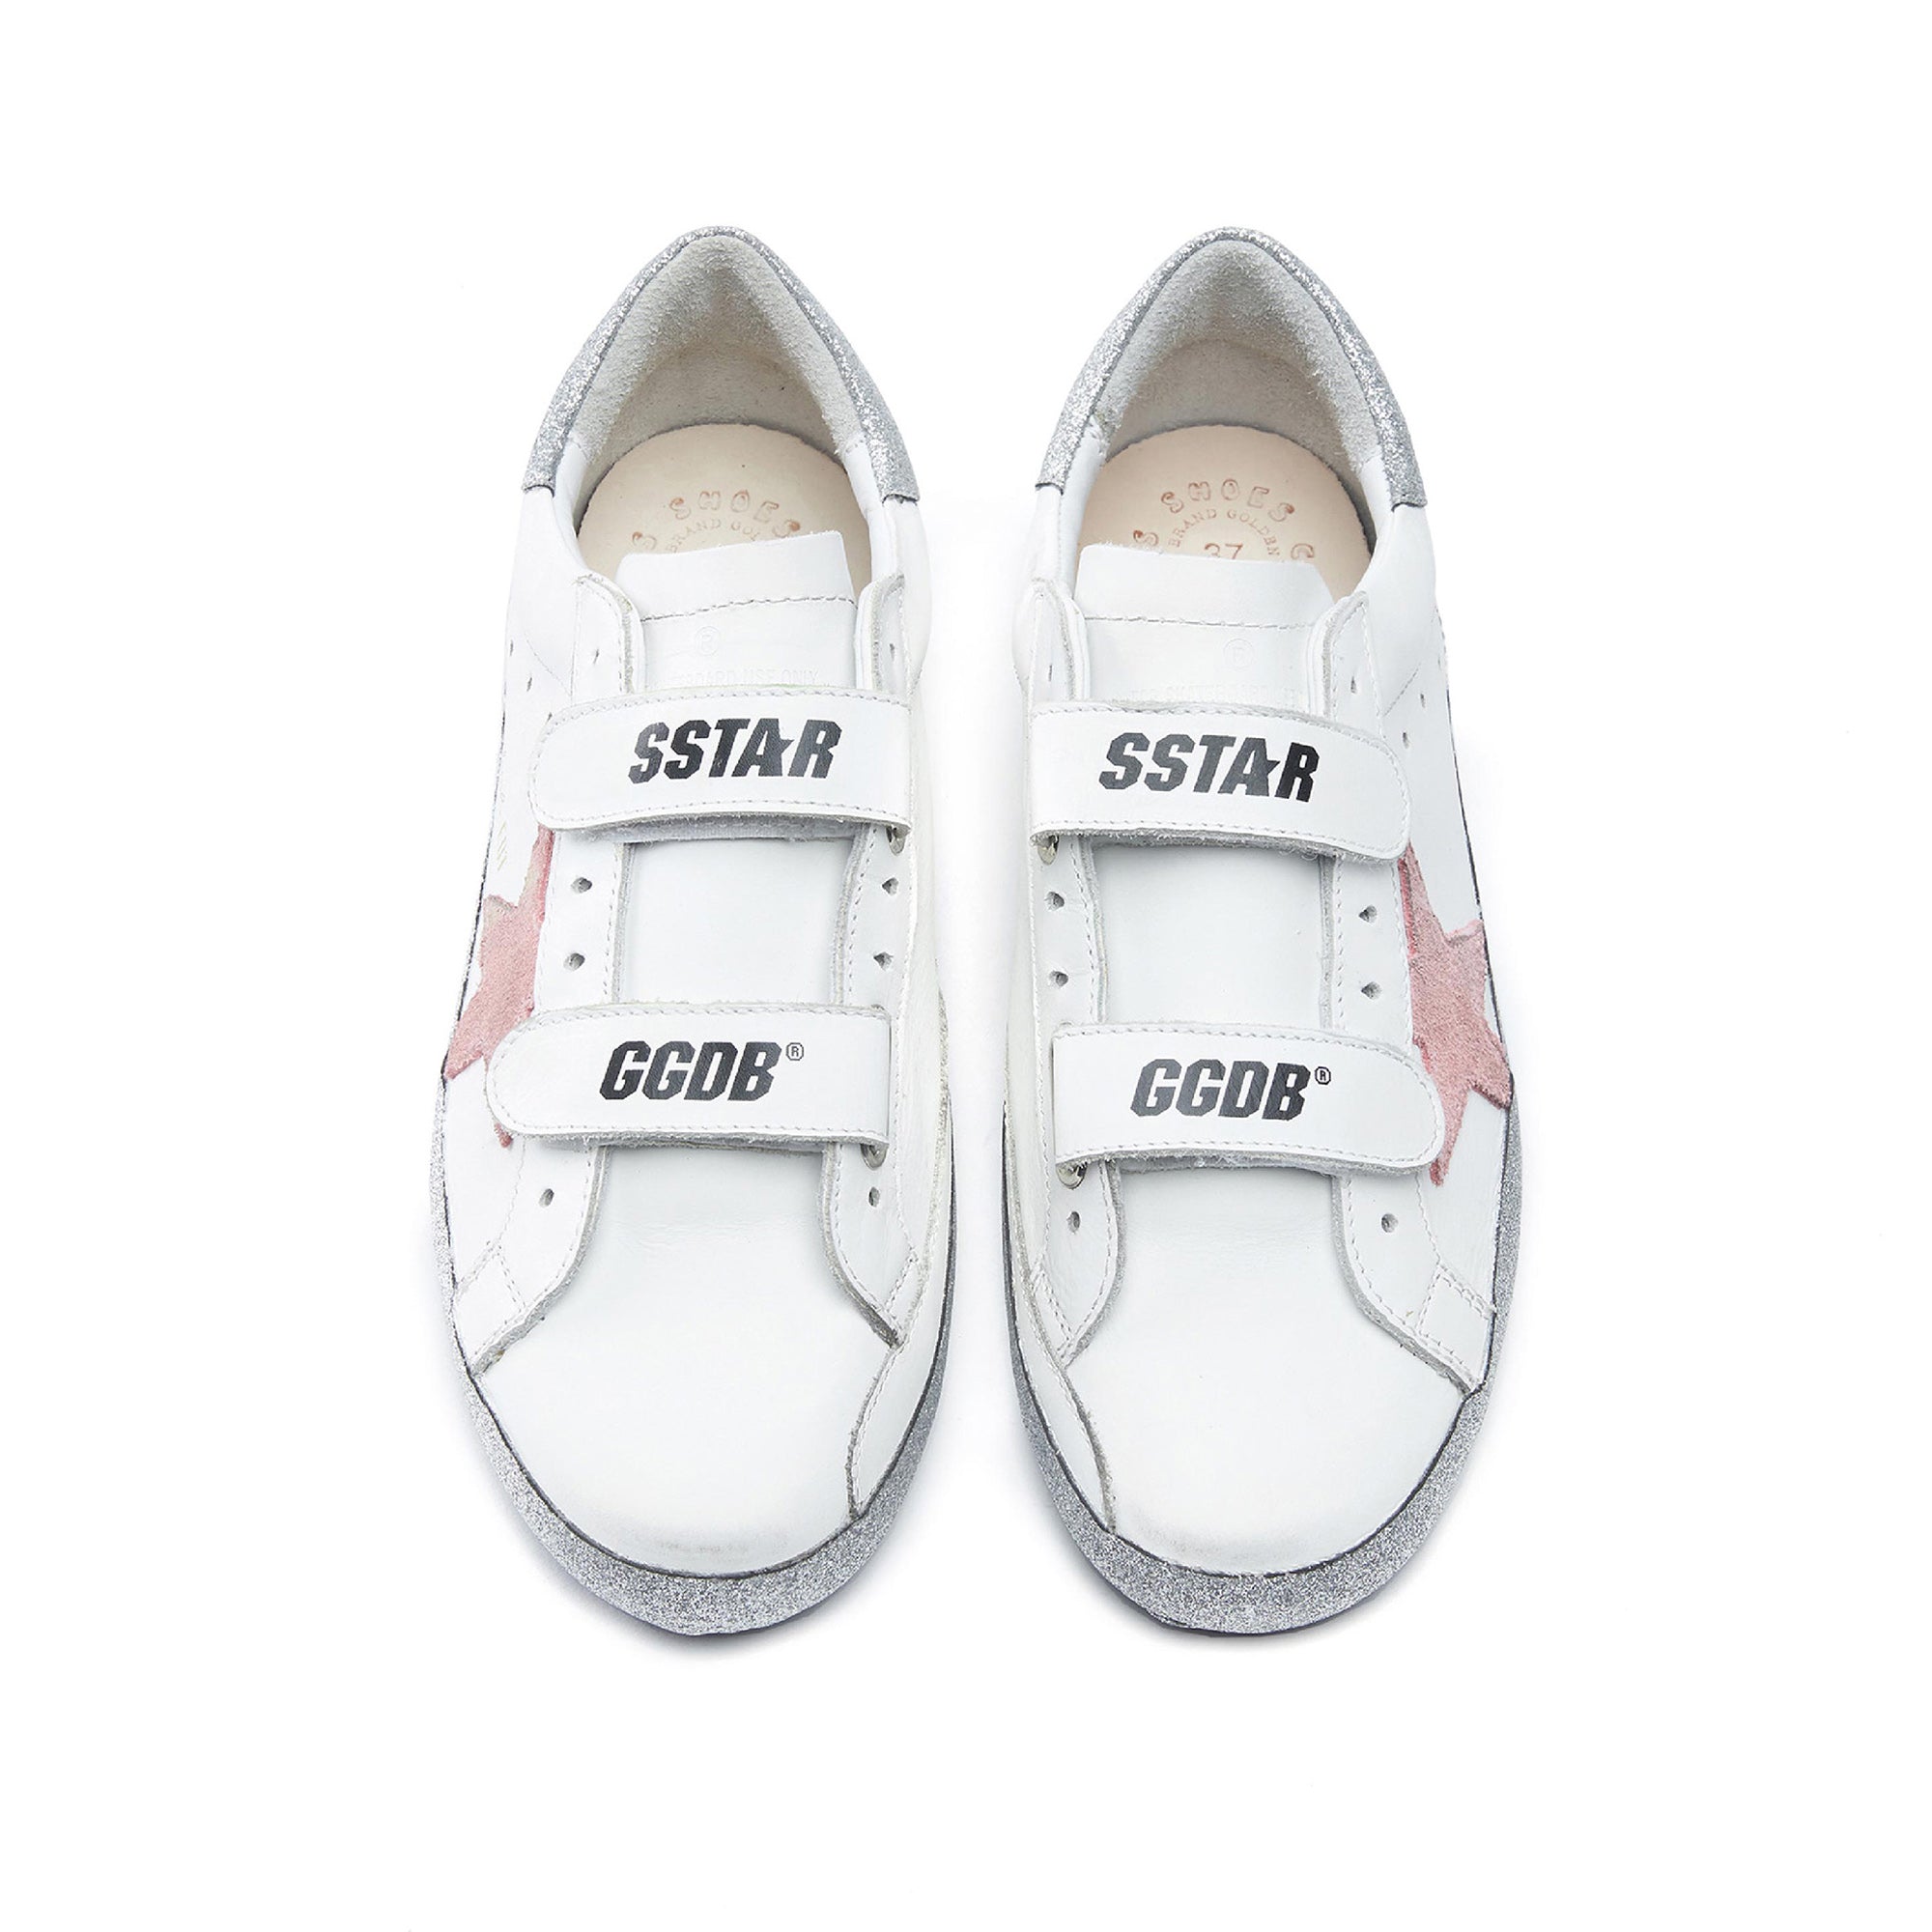 Girls White & Pink Star Leather Shoes